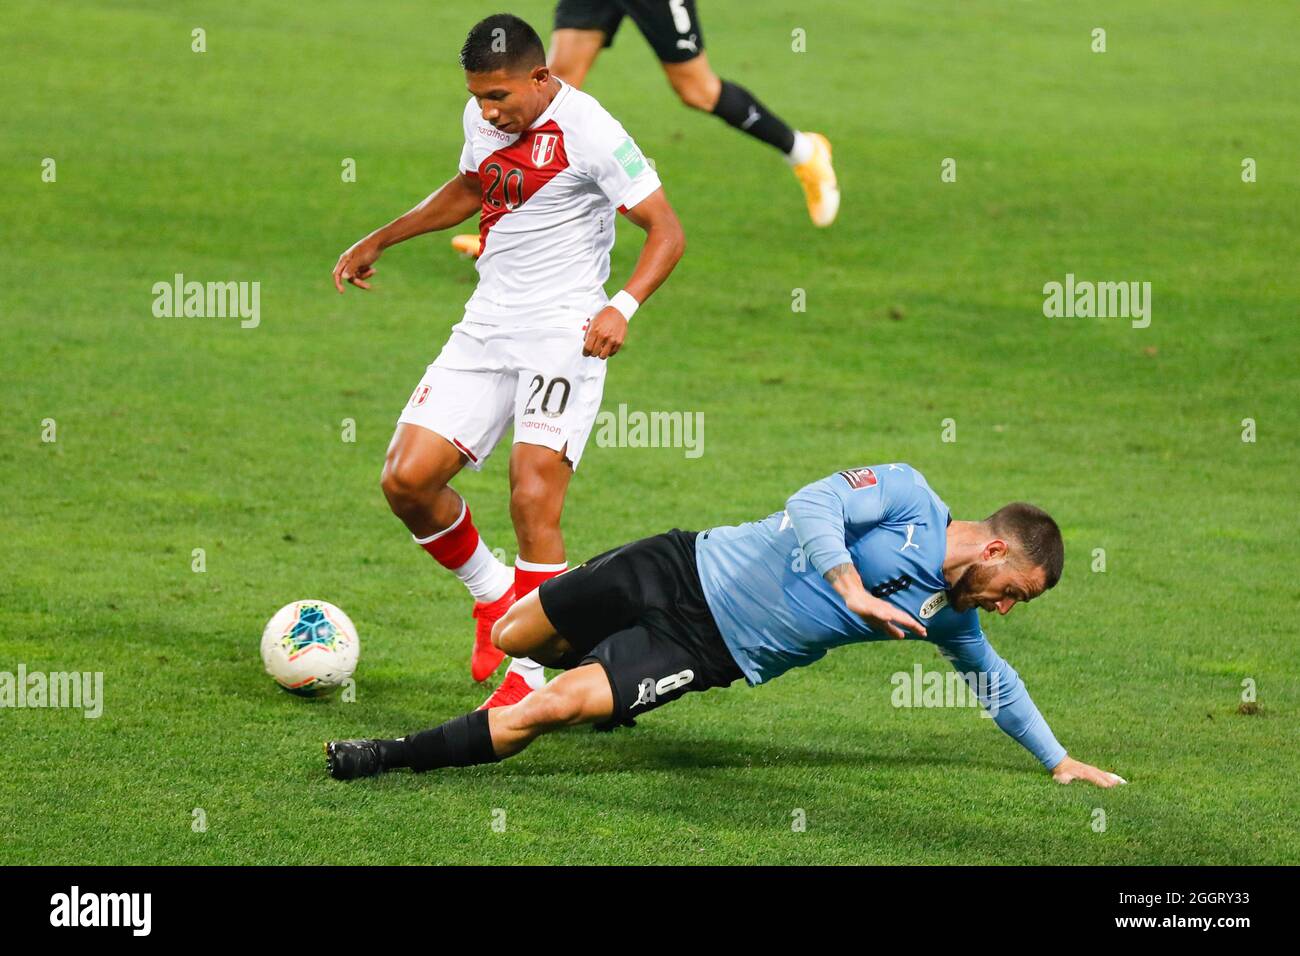 Lima, Peru. 02nd Sep, 2021. Edison Flores during a match between Peru and Uruguay played at the Estádio Nacional del Peru, in Lima, Peru. Game valid for the 9th round of the South American Qualifiers for the Qatar World Cup 2022. Credit: Ricardo Moreira/FotoArena/Alamy Live News Stock Photo